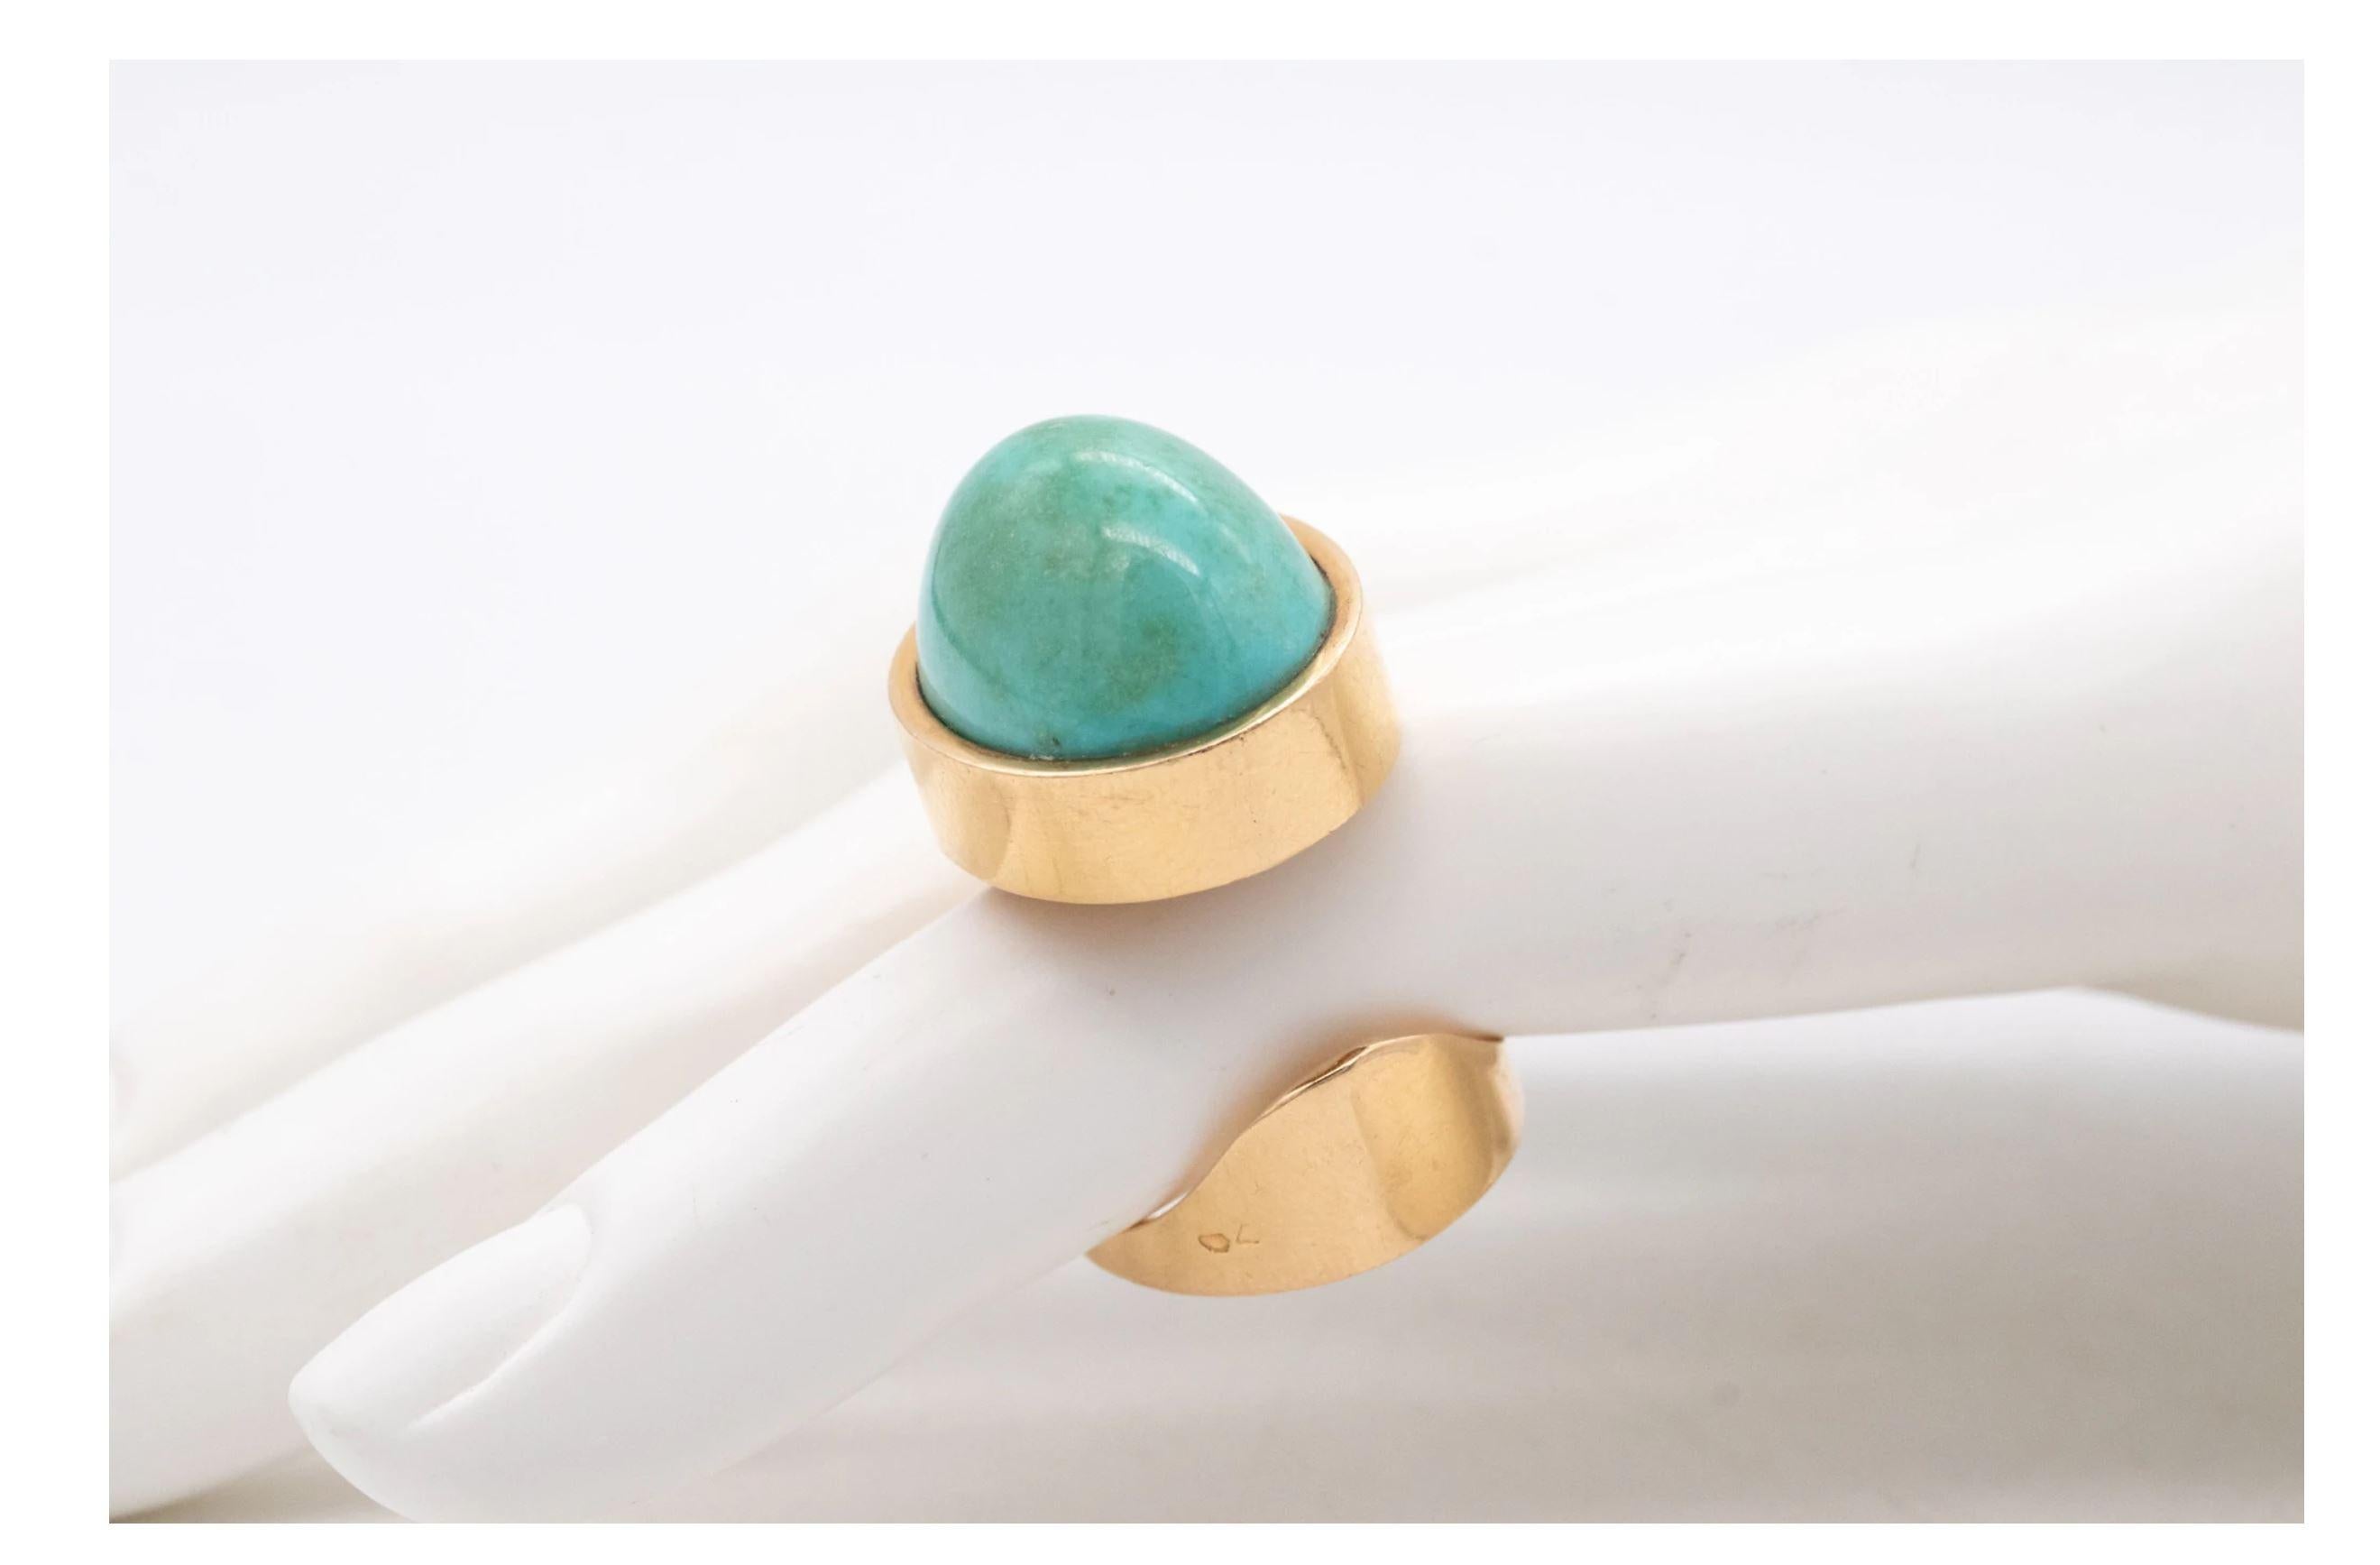 Women's Dinh Van Paris For Pierre Cardin 1970 Geometric Ring 18Kt Yellow Gold Turquoise